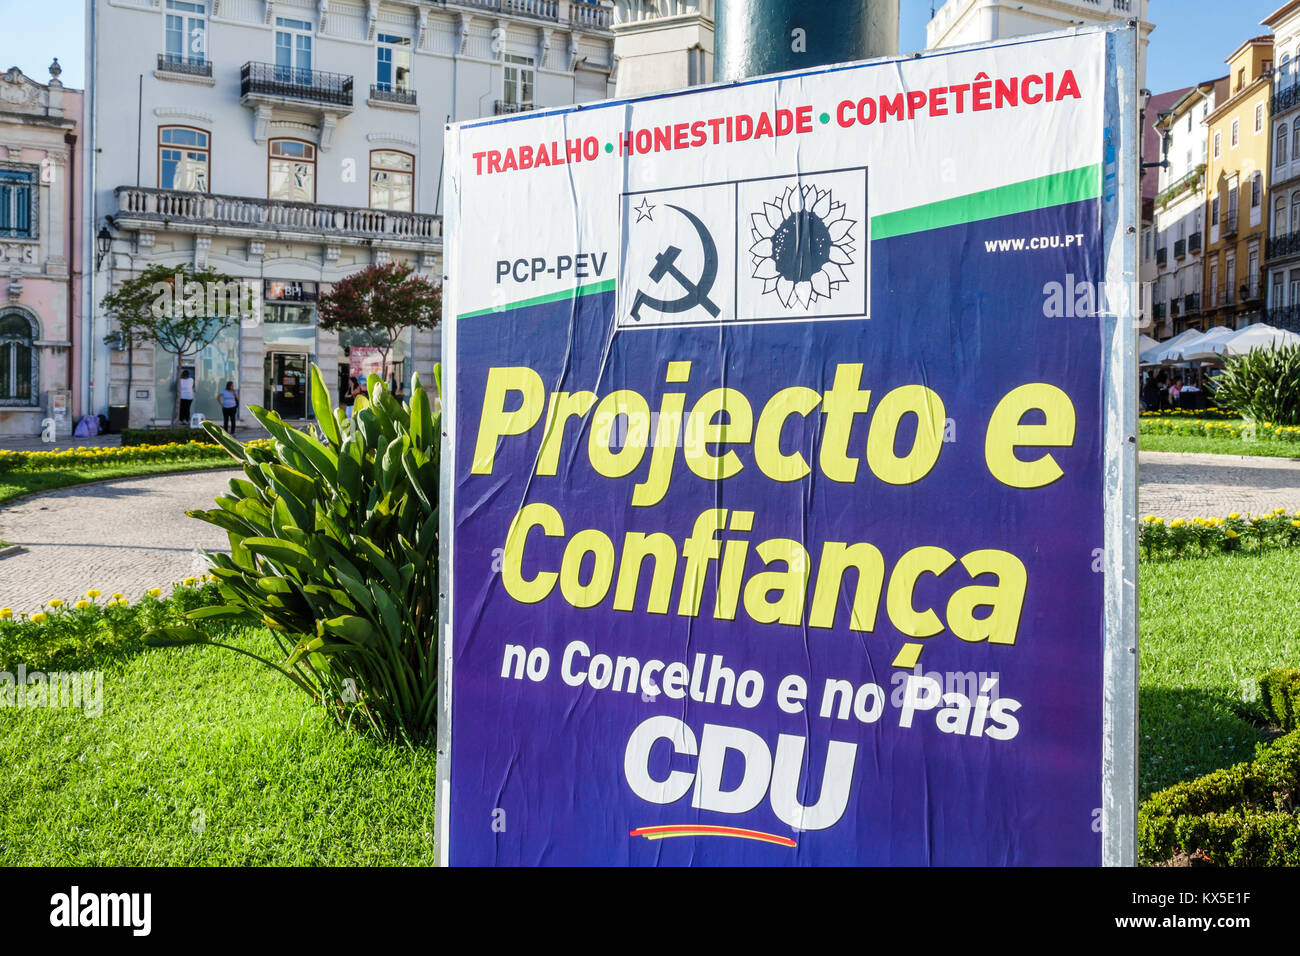 Portuguese Billboard High Resolution Stock Photography and Images - Alamy